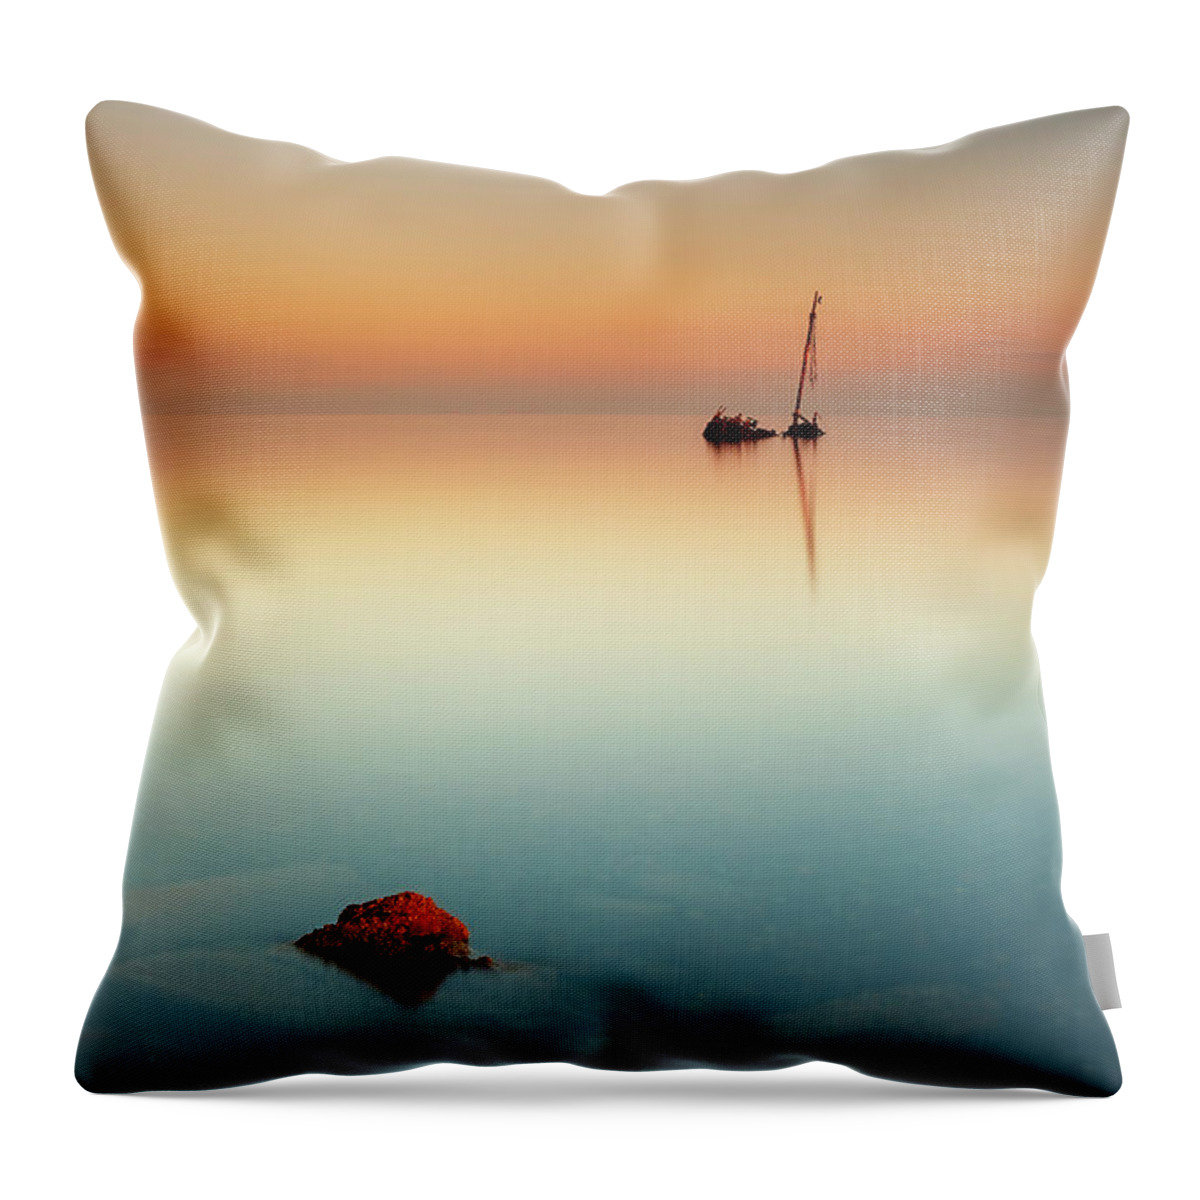 Shipwreck Throw Pillow featuring the photograph Flat calm shipwreck #1 by Grant Glendinning